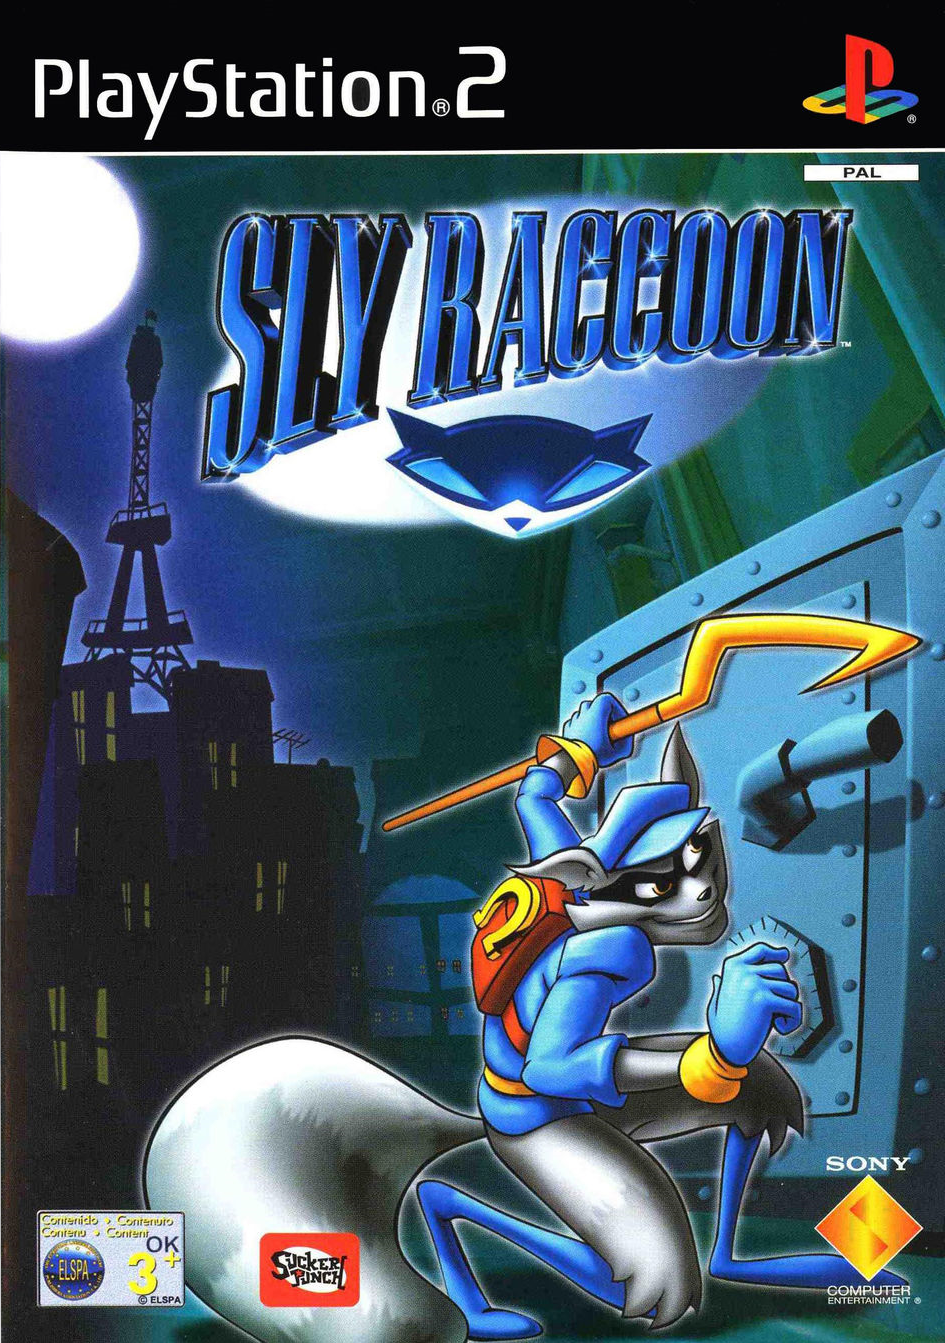  Sly Cooper: Thieves in Time - Playstation 3 : Sony Computer  Entertainme: Video Games